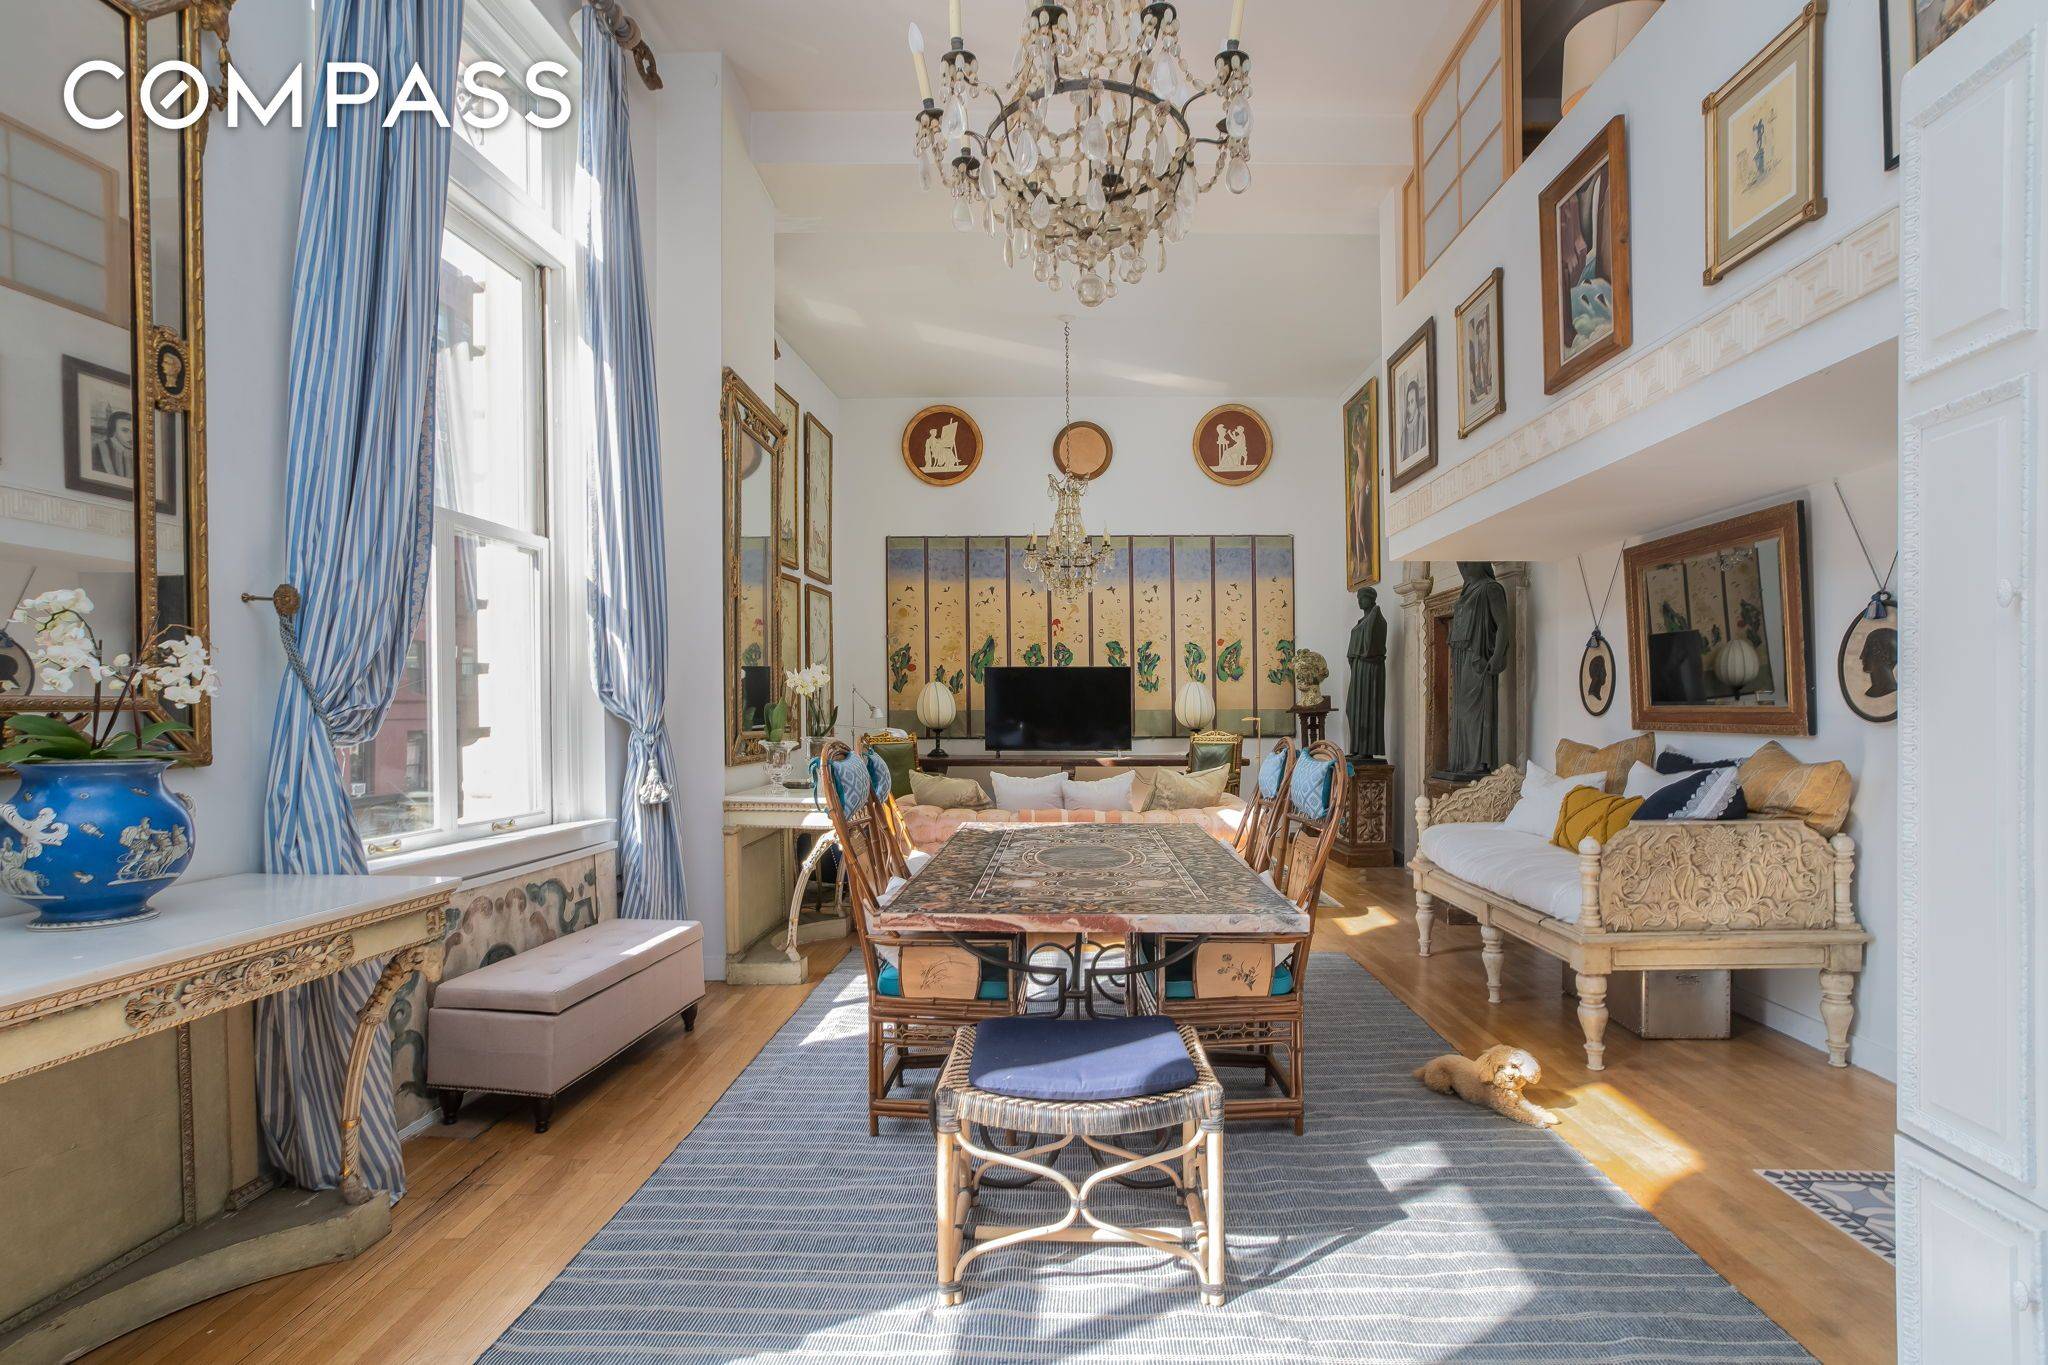 Lavish, opulent, and elegant are just a few words to describe this fully furnished 2 bedroom 2 bath duplexed home once featured in Architectural Digest for its eclectic antiques and ...